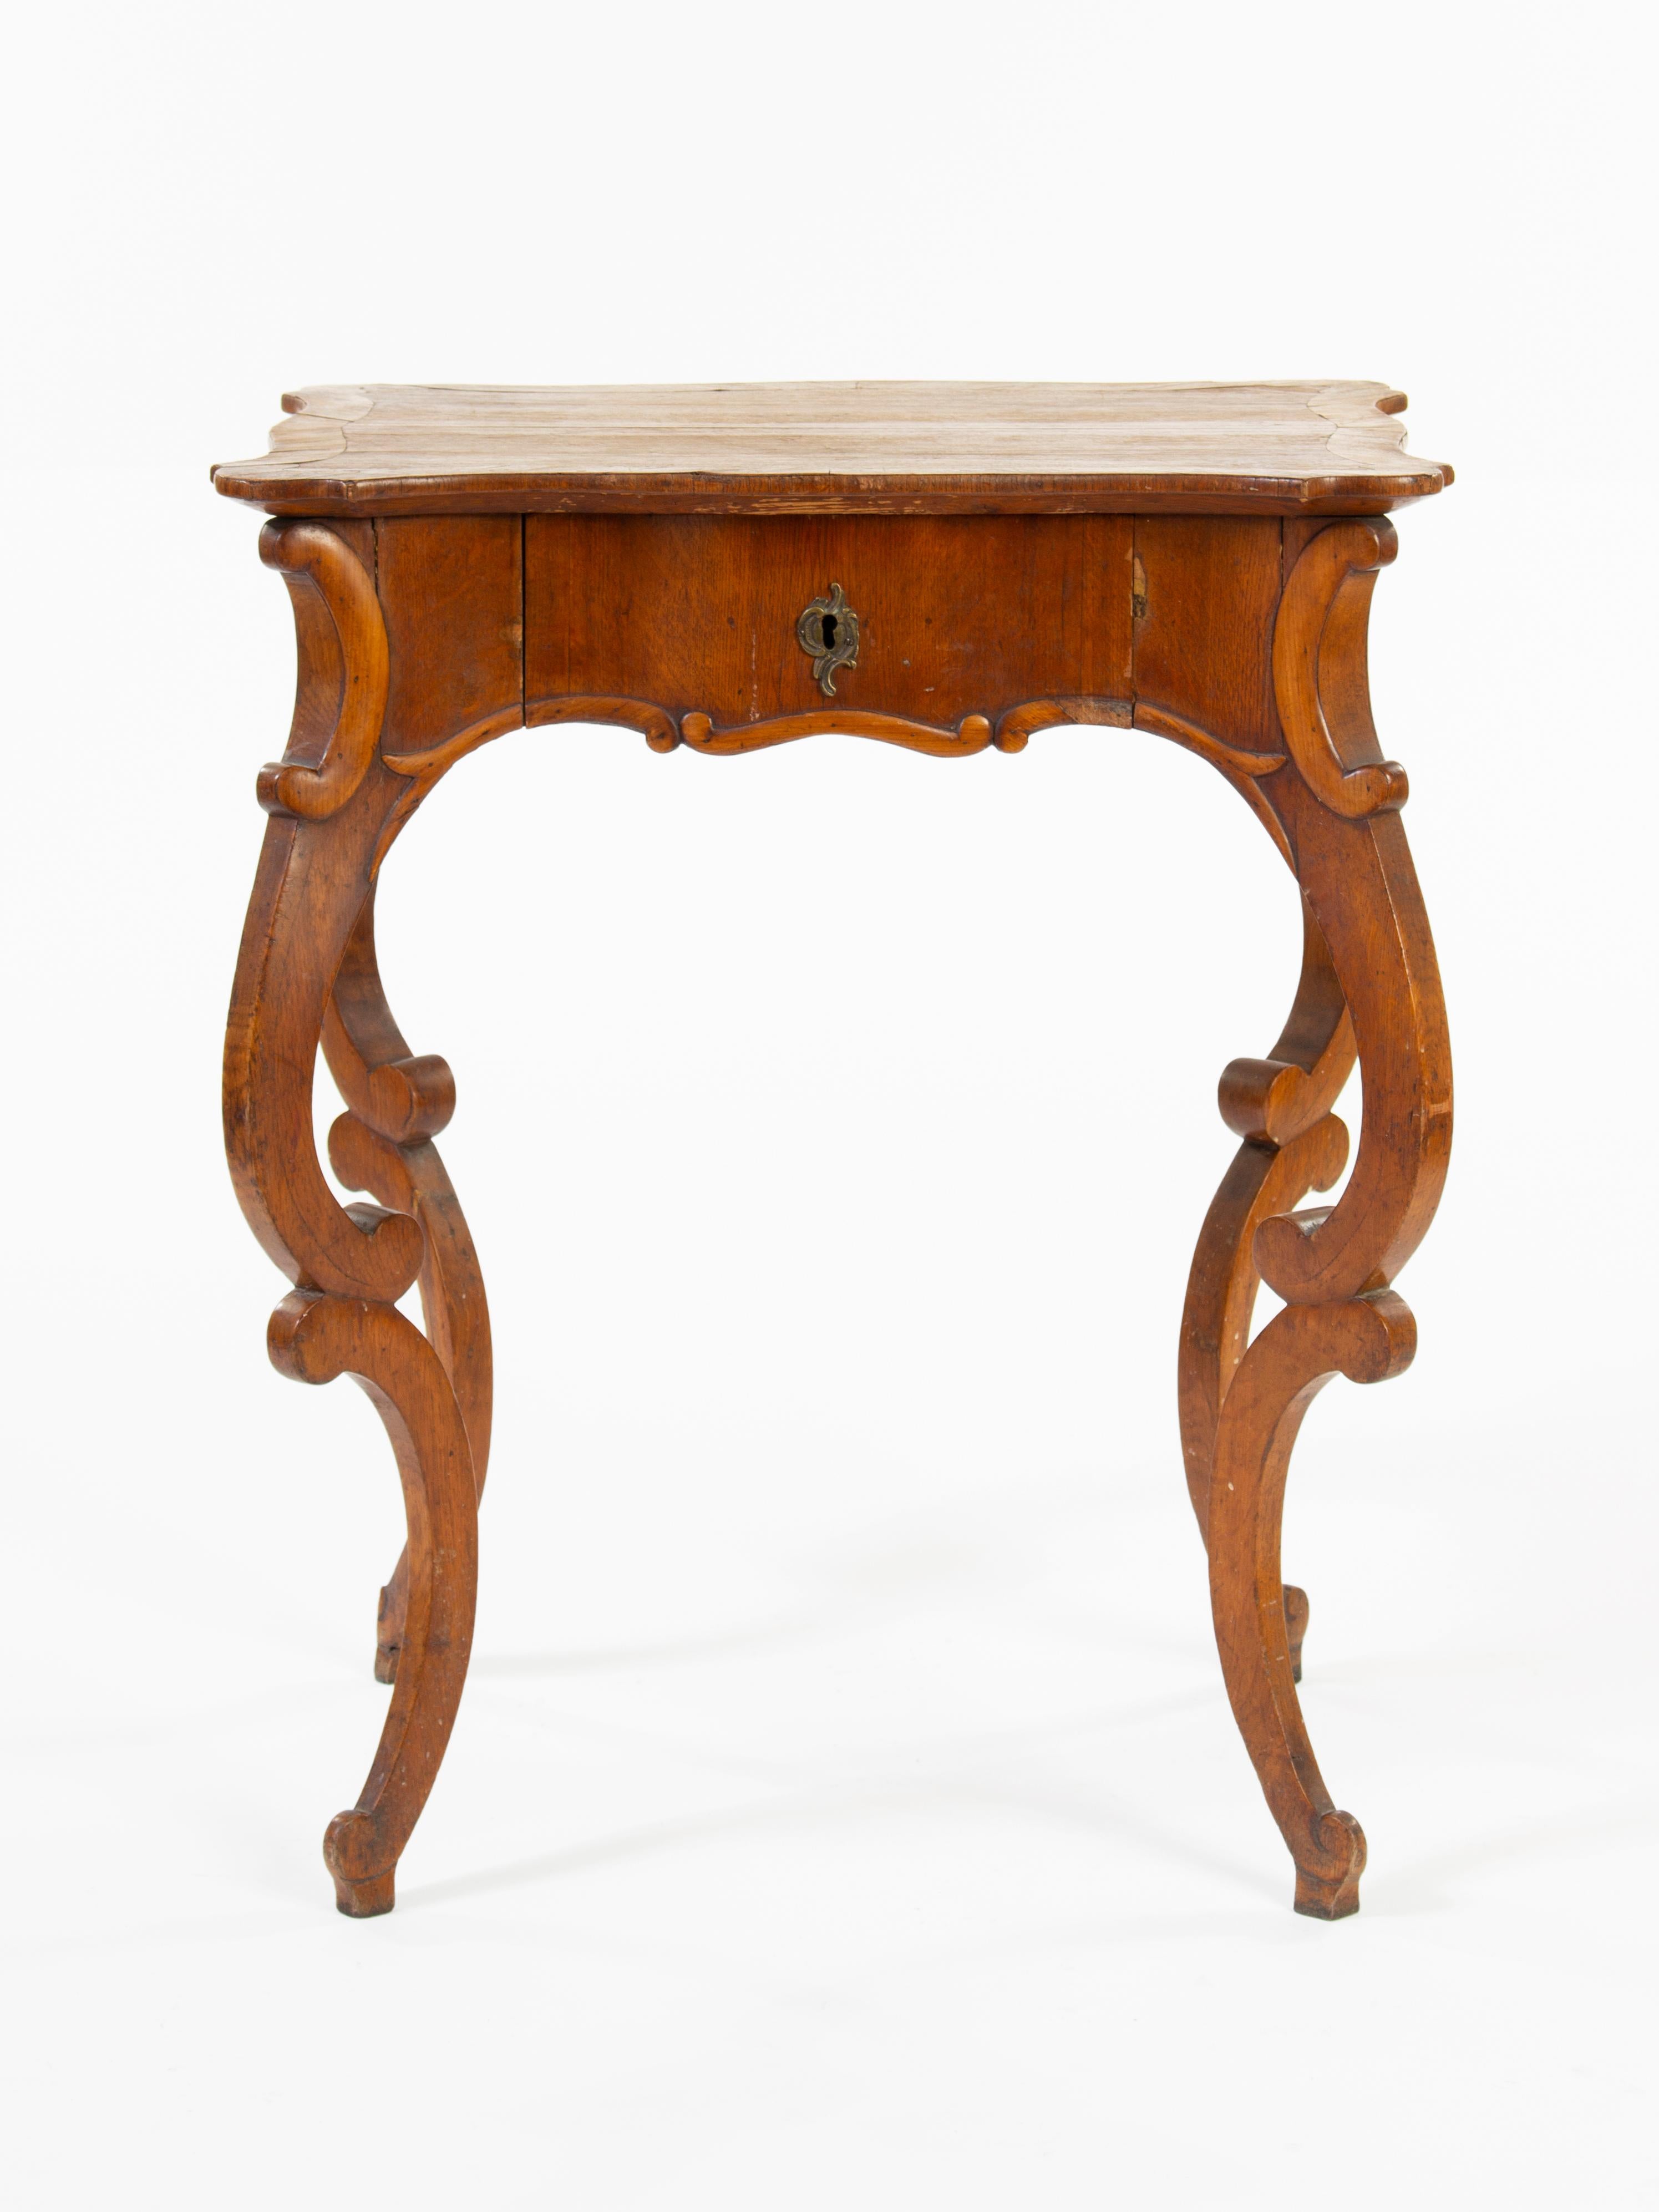 The Louis Philippe Rococo table is an elegant and sophisticated piece of furniture, typically crafted from mahogany or other rich woods. These tables usually feature embossed or carved details, along with fine craftsmanship, typically with rounded